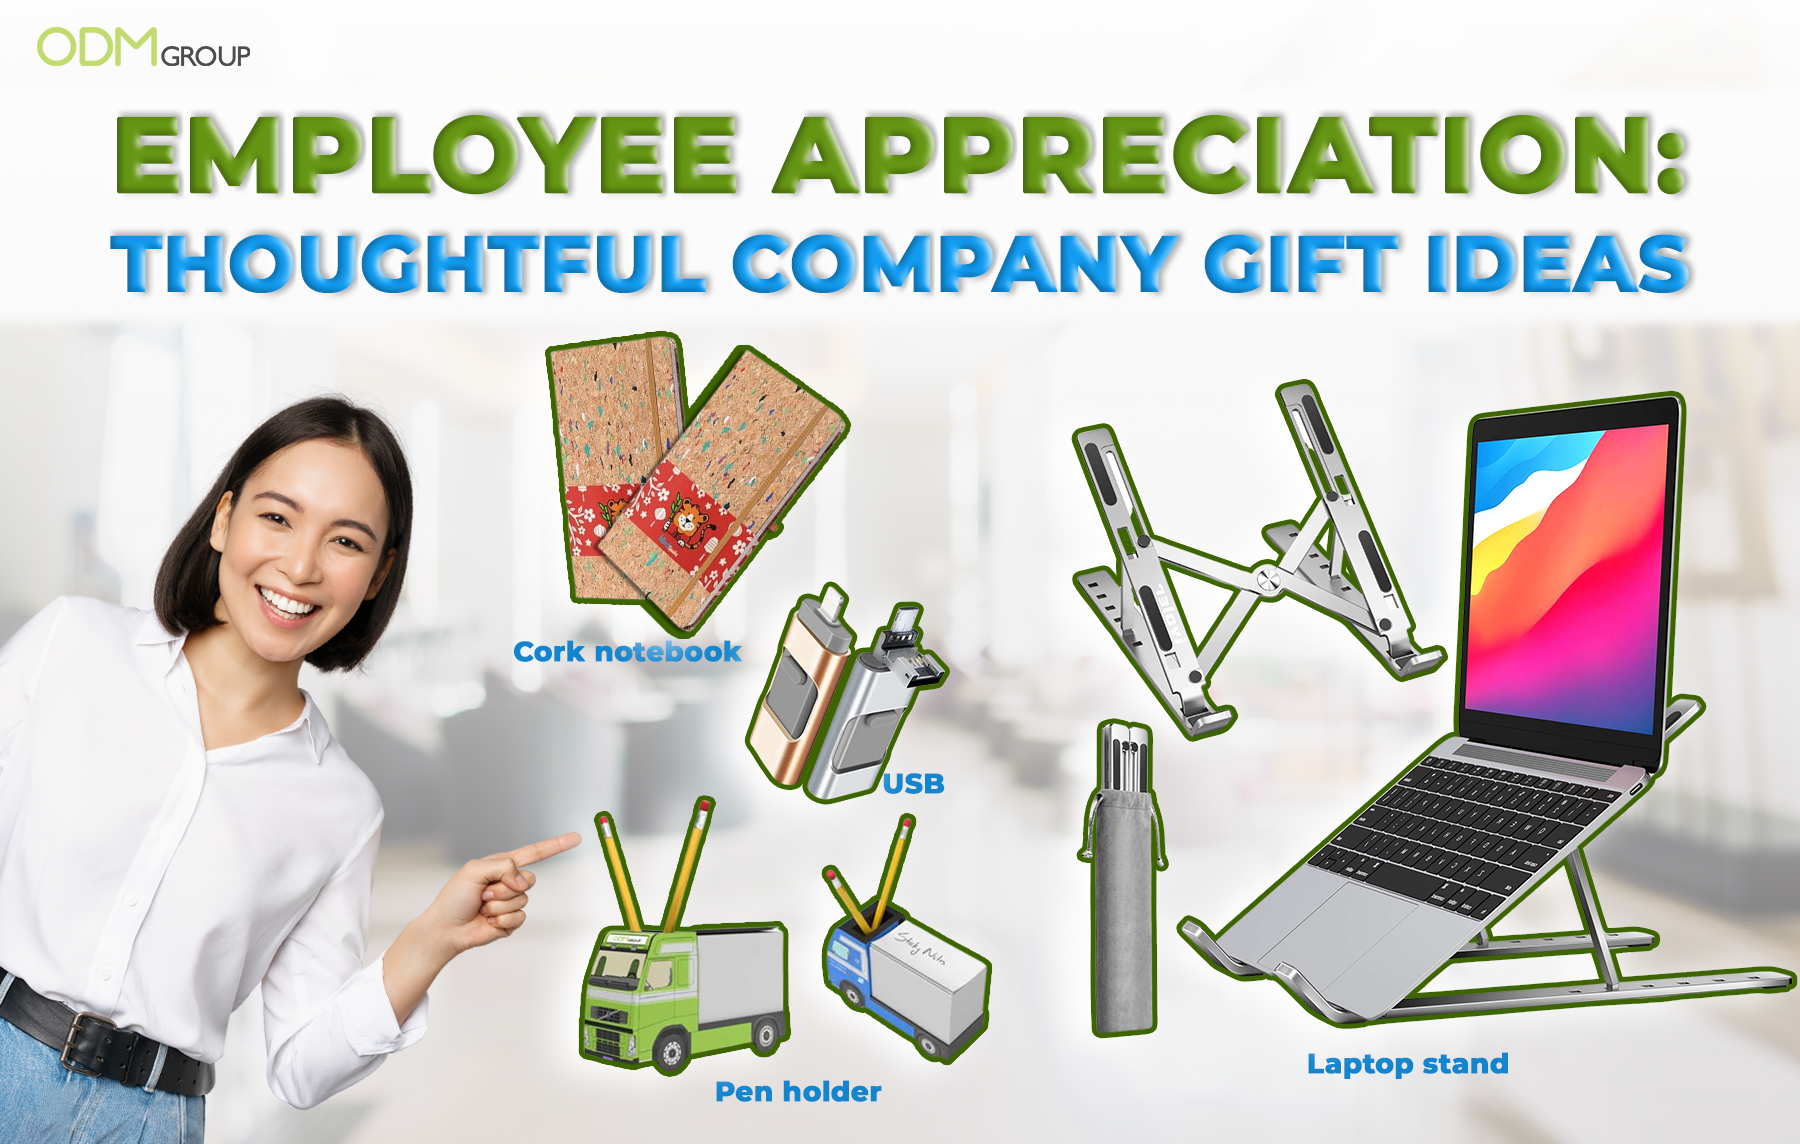 Various company gifts for employees including a cork notebook, USB, pen holder, and laptop stand by ODM Group.